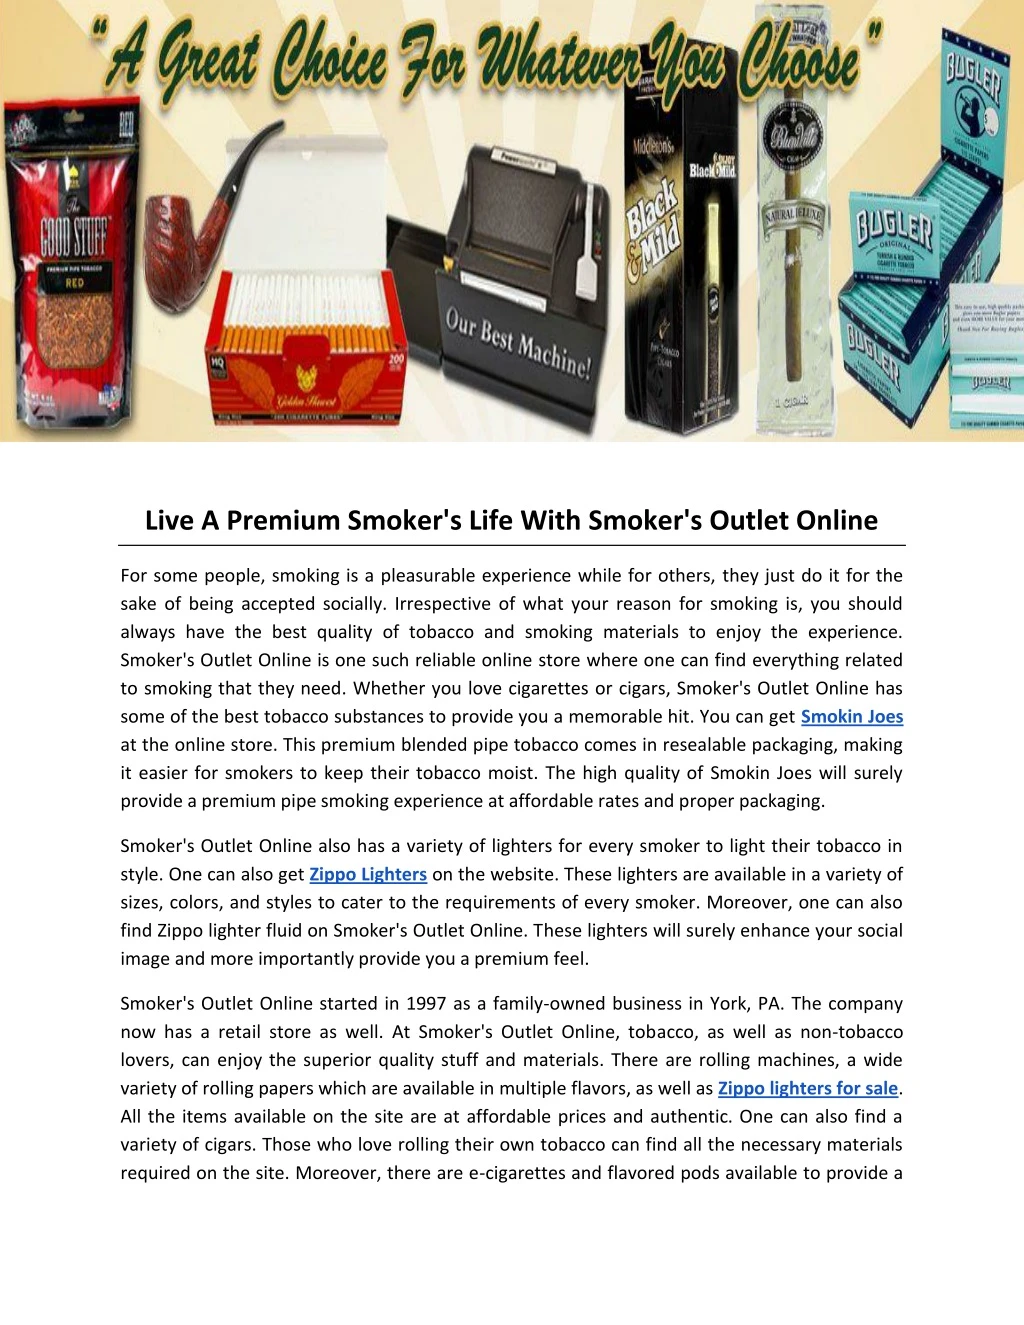 live a premium smoker s life with smoker s outlet